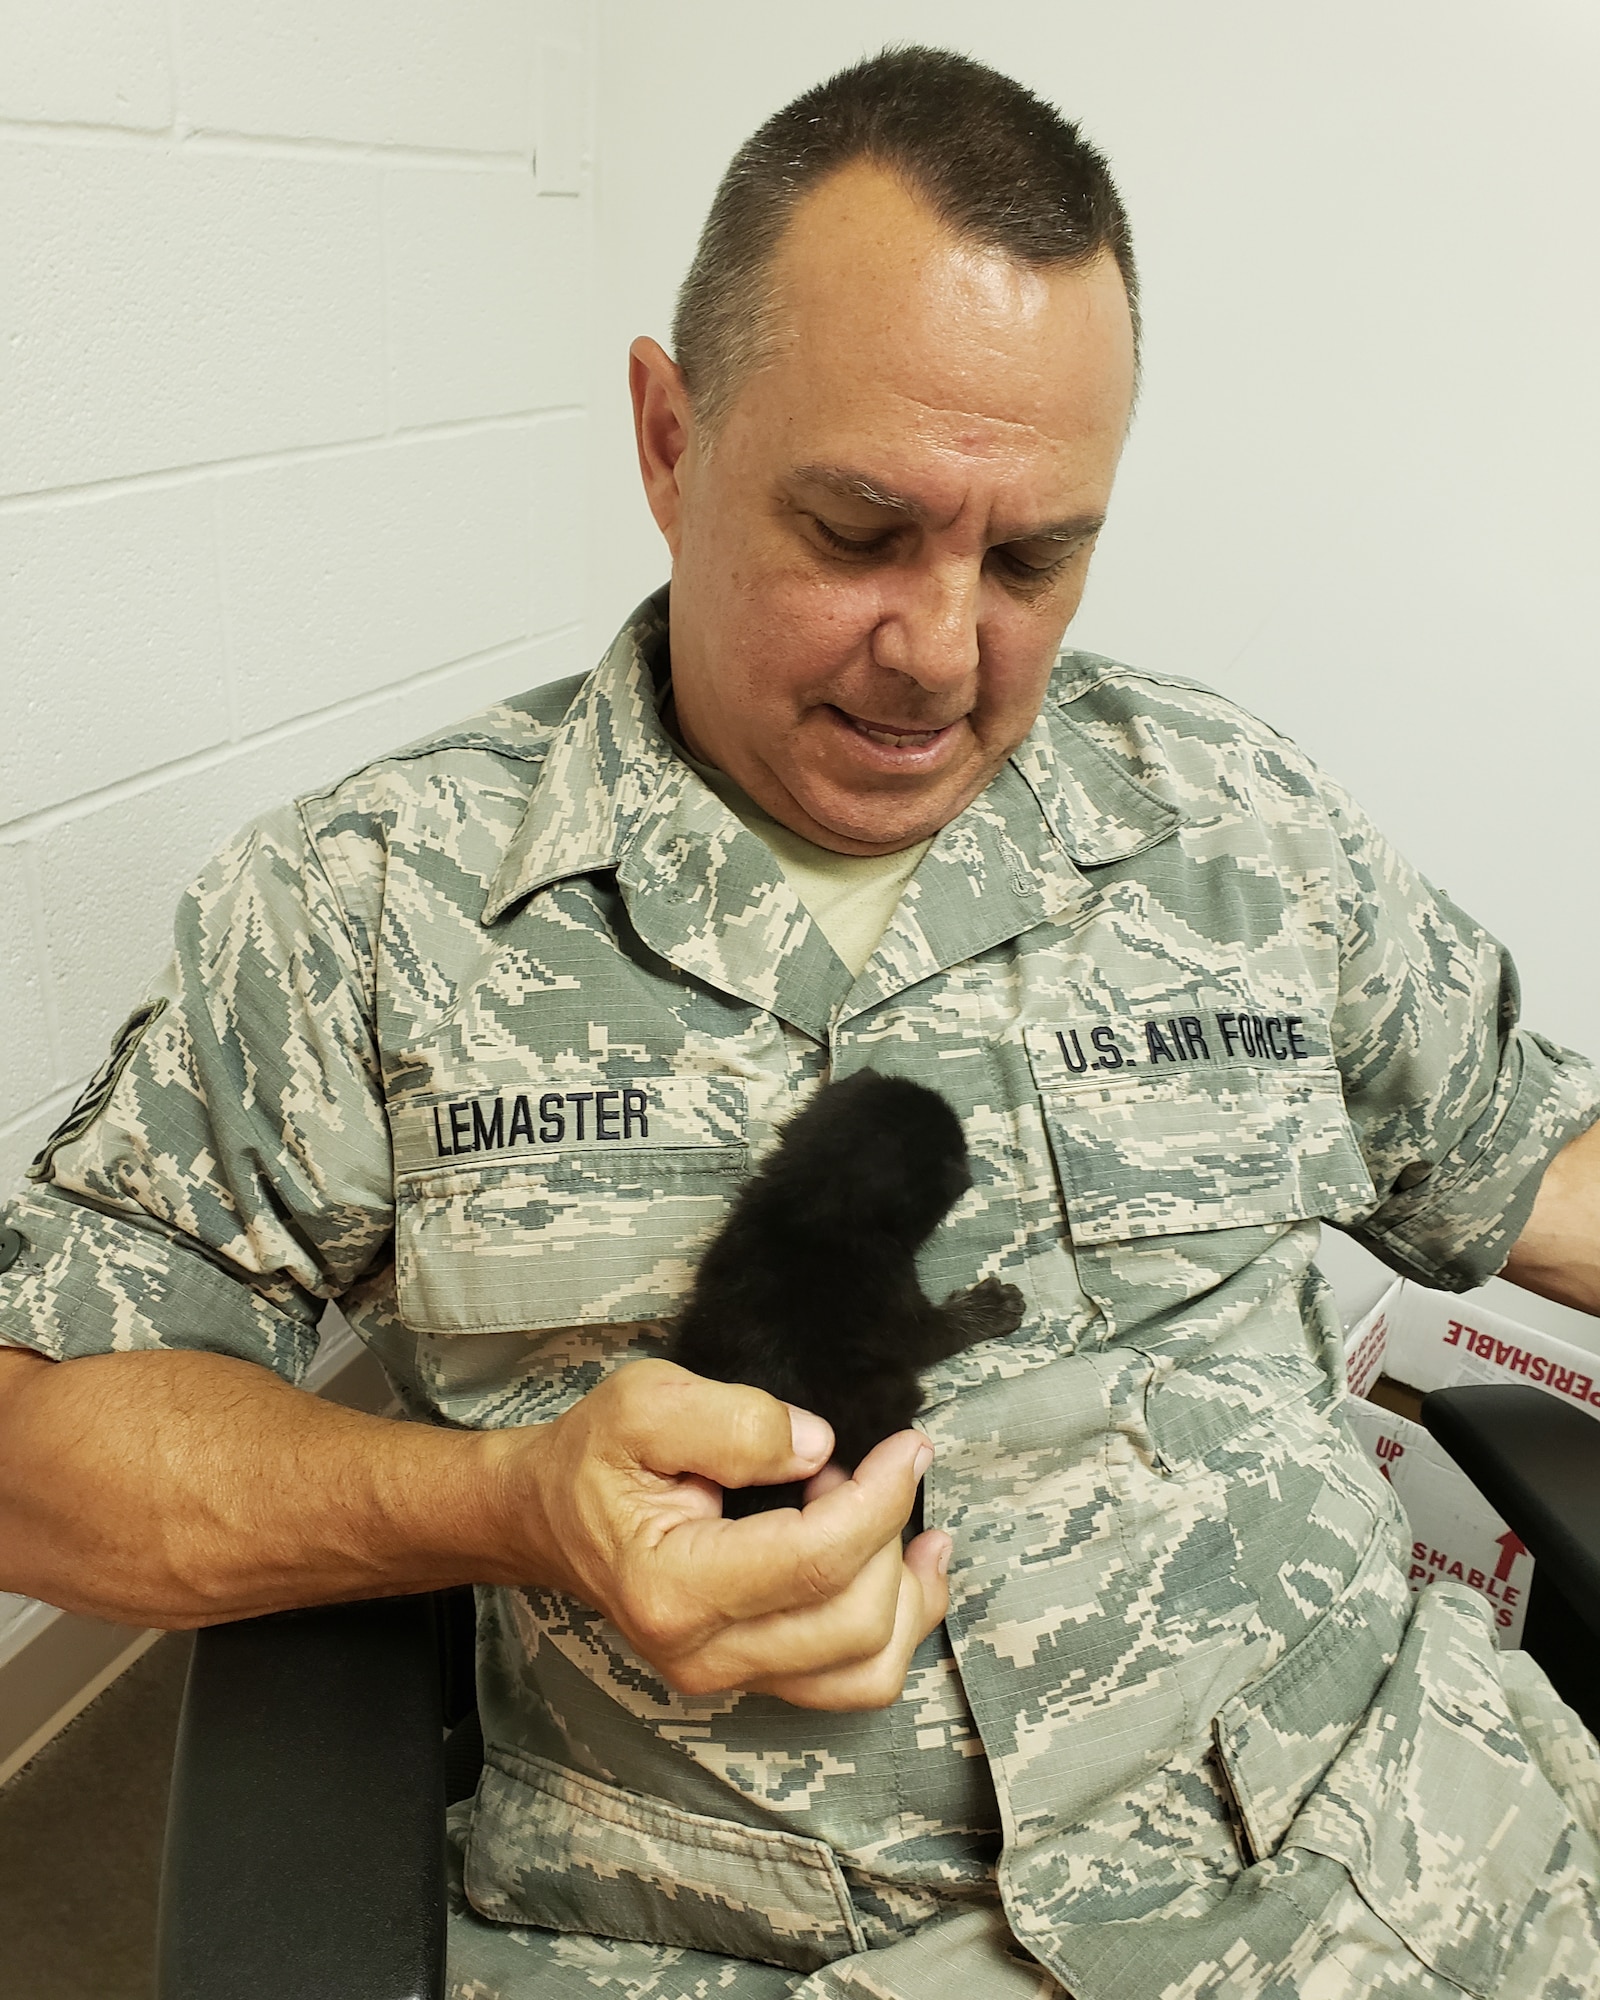 Tech. Sgt. Darryl LeMaster, a crew chief for the 167th Airlift Wing, holds a kitten that he found on the flight line while supervising an aircraft refueling at the Martinsburg, W.Va. air base, June 19. The kitten had fallen off of a refueling truck as a fuel hose was pulled from its reel. Three other kittens were found inside the hose reel on the truck. The kittens eventually found homes with 167th AW Airmen.